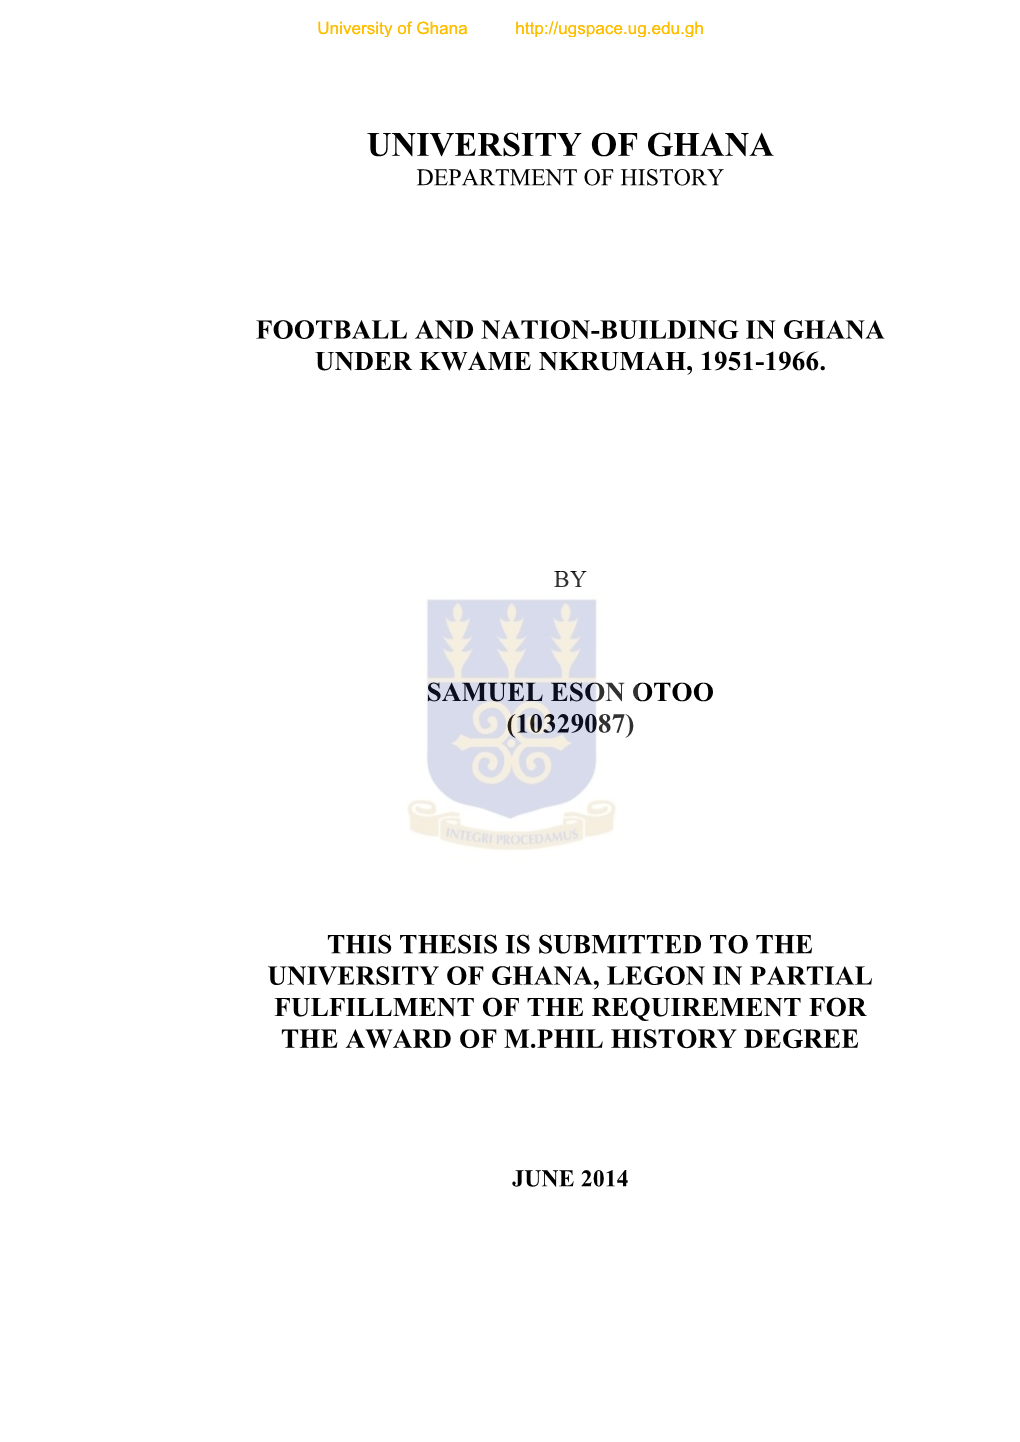 Football and Nation-Building in Ghana Under Kwame Nkrumah, 1951-1966